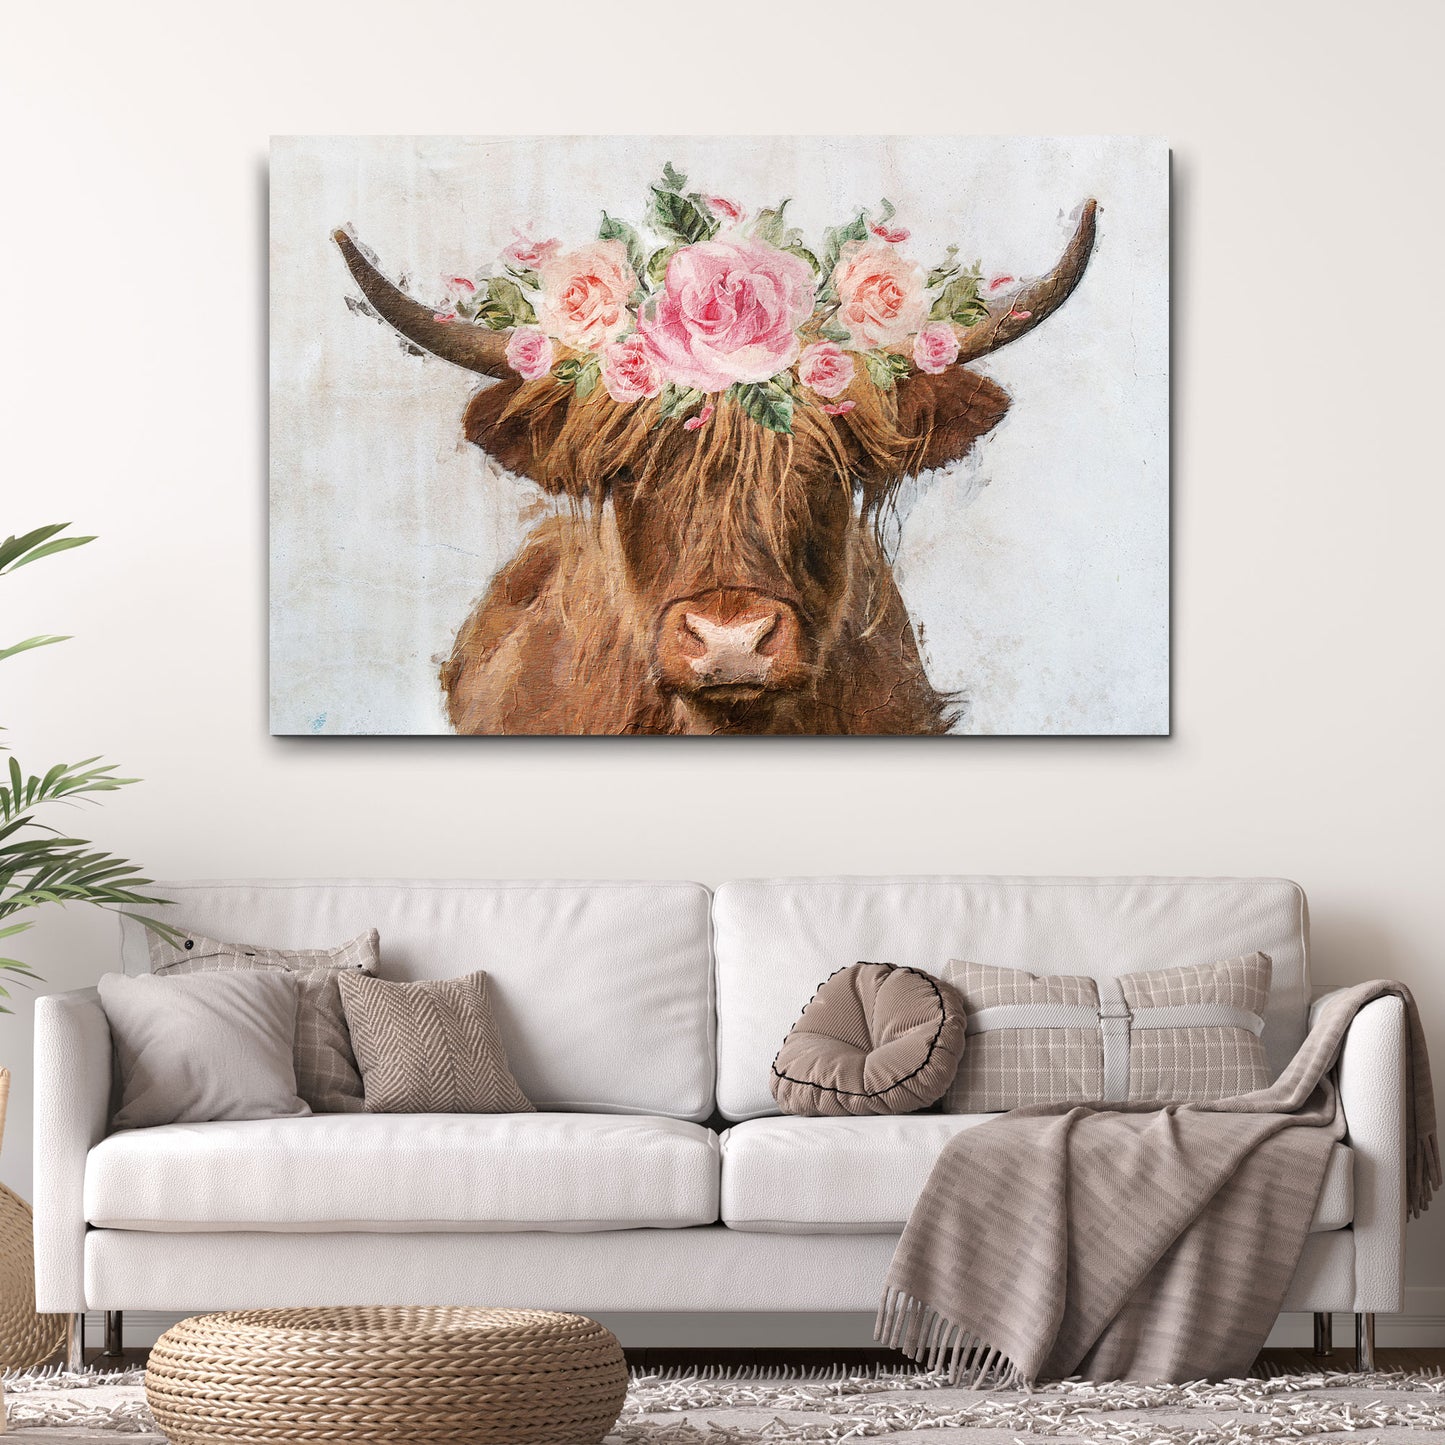 Highland Cow Floral Wreath Painting Canvas Wall Art Style 2 - Image by Tailored Canvases